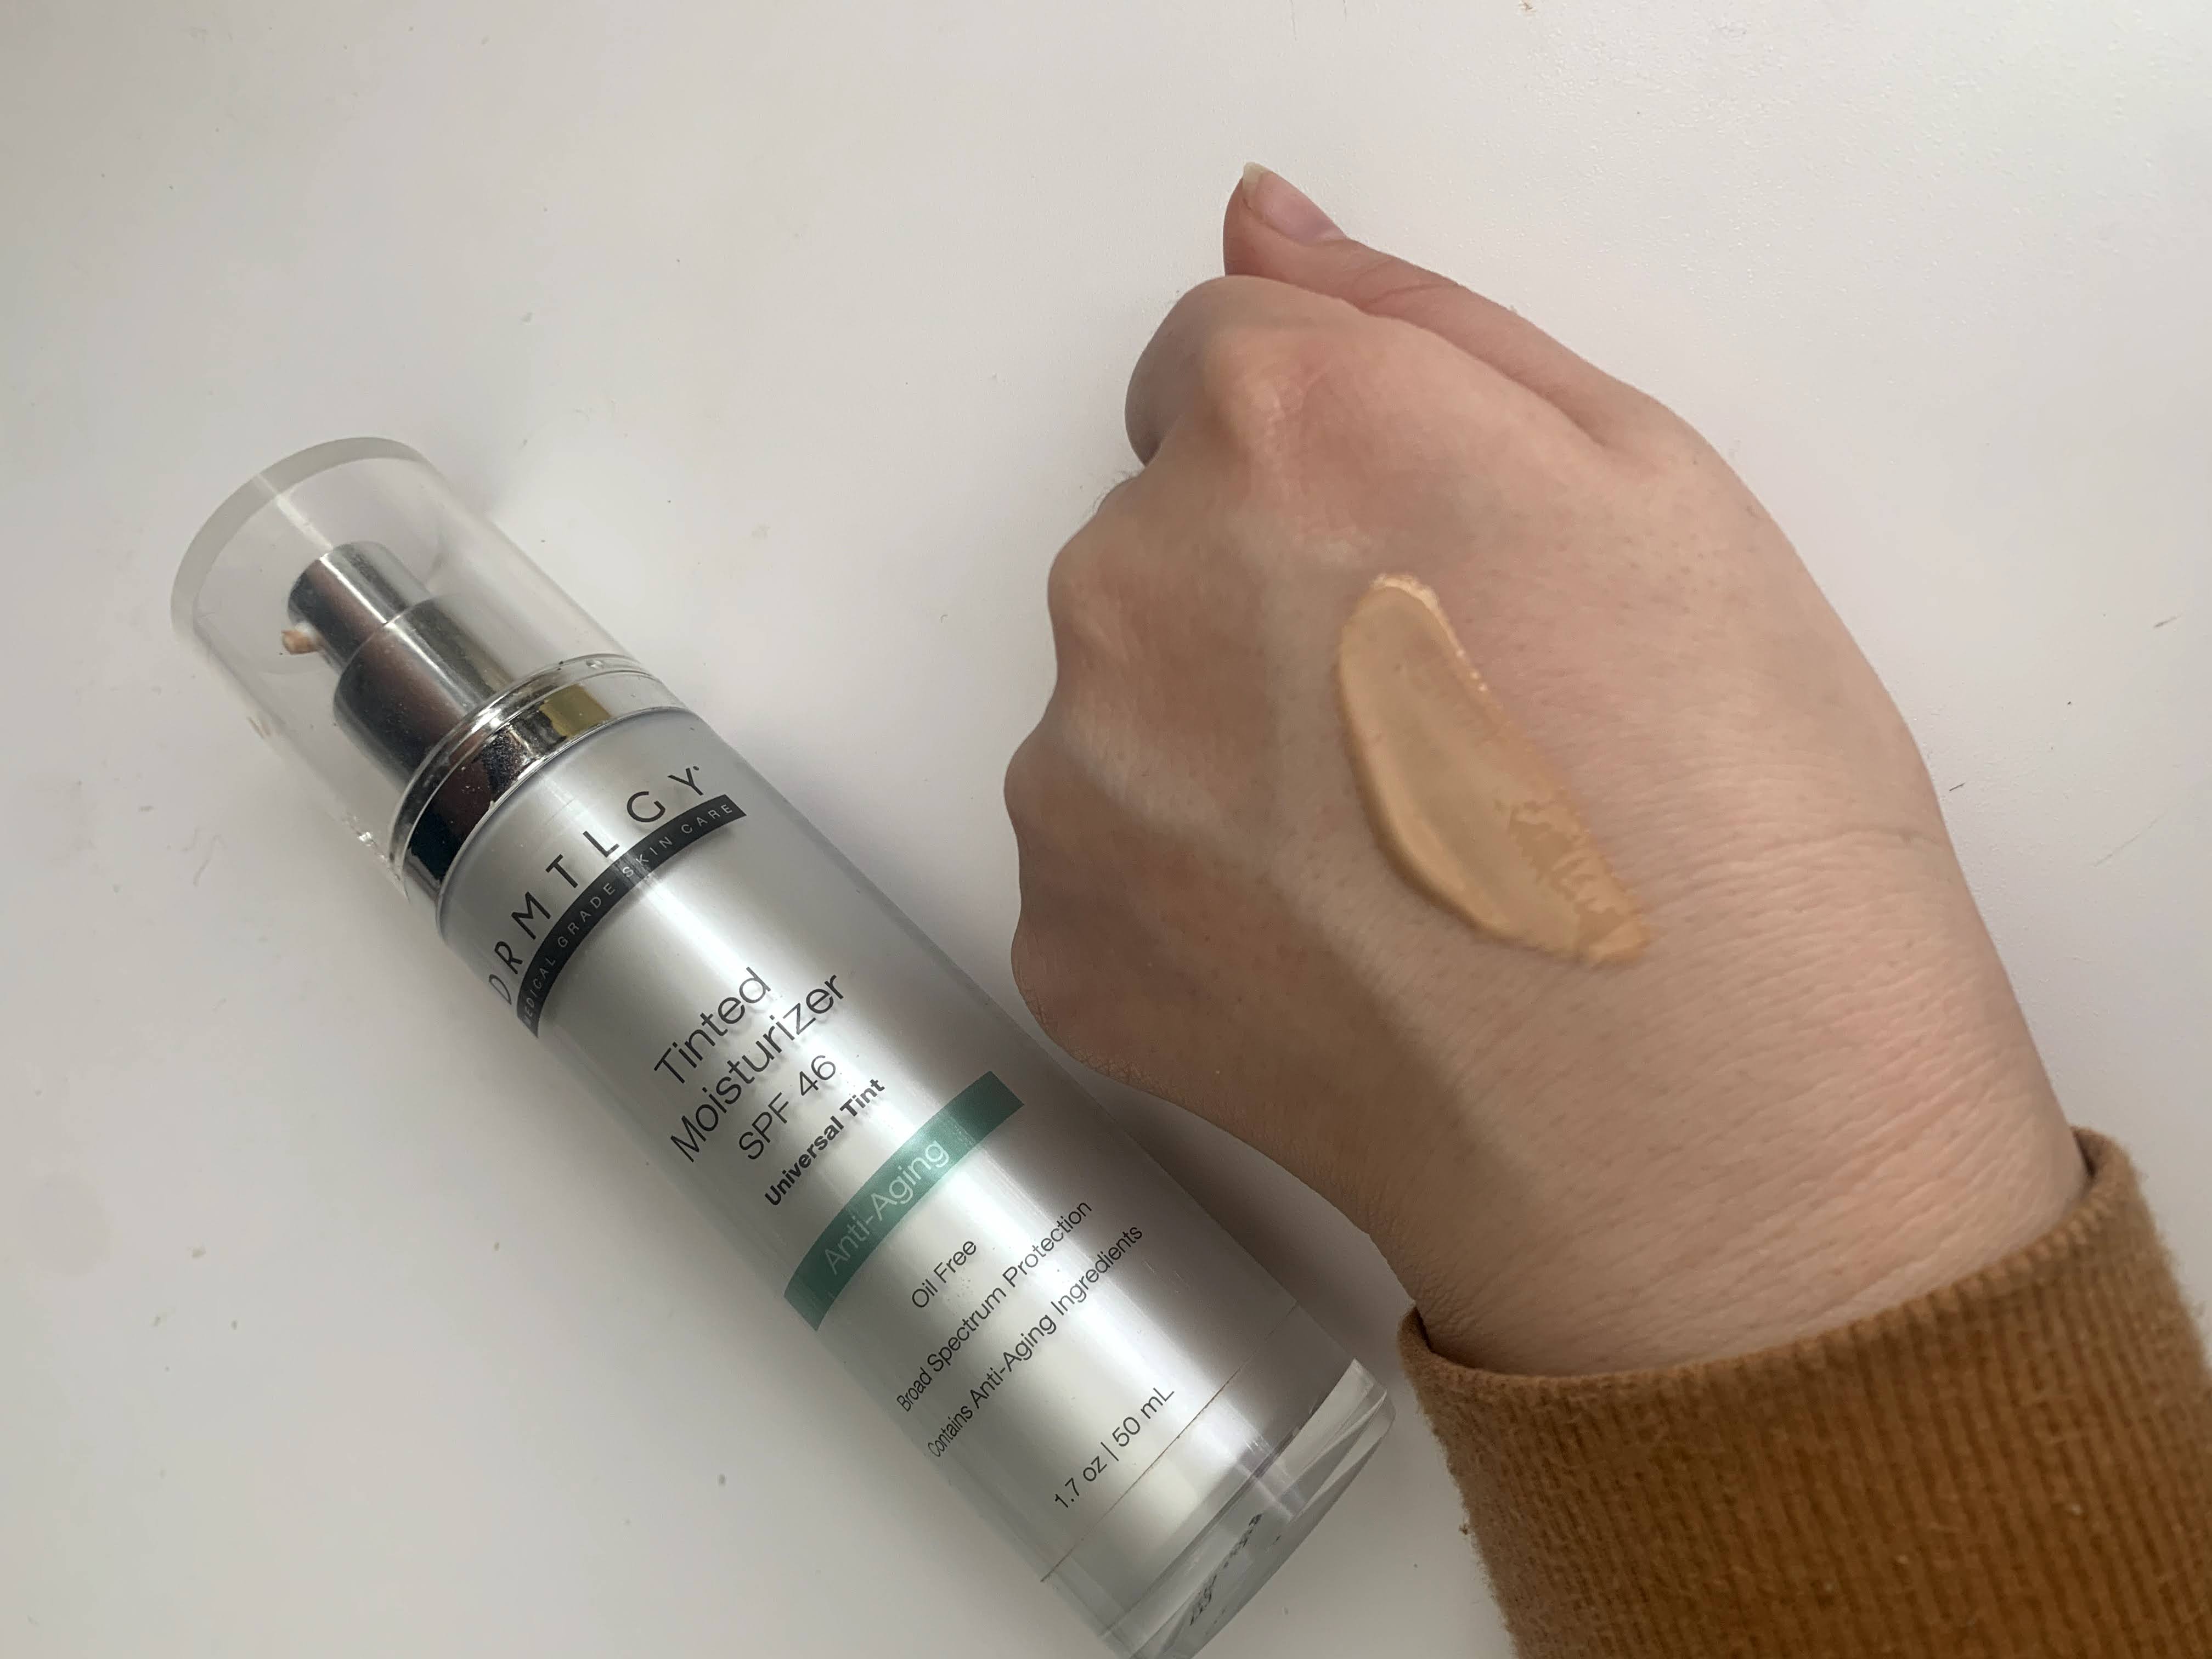 Photo of the Drmtlgy Sunscreen: Tinted Moisturizer SPF 46. Swatch and texture of the product